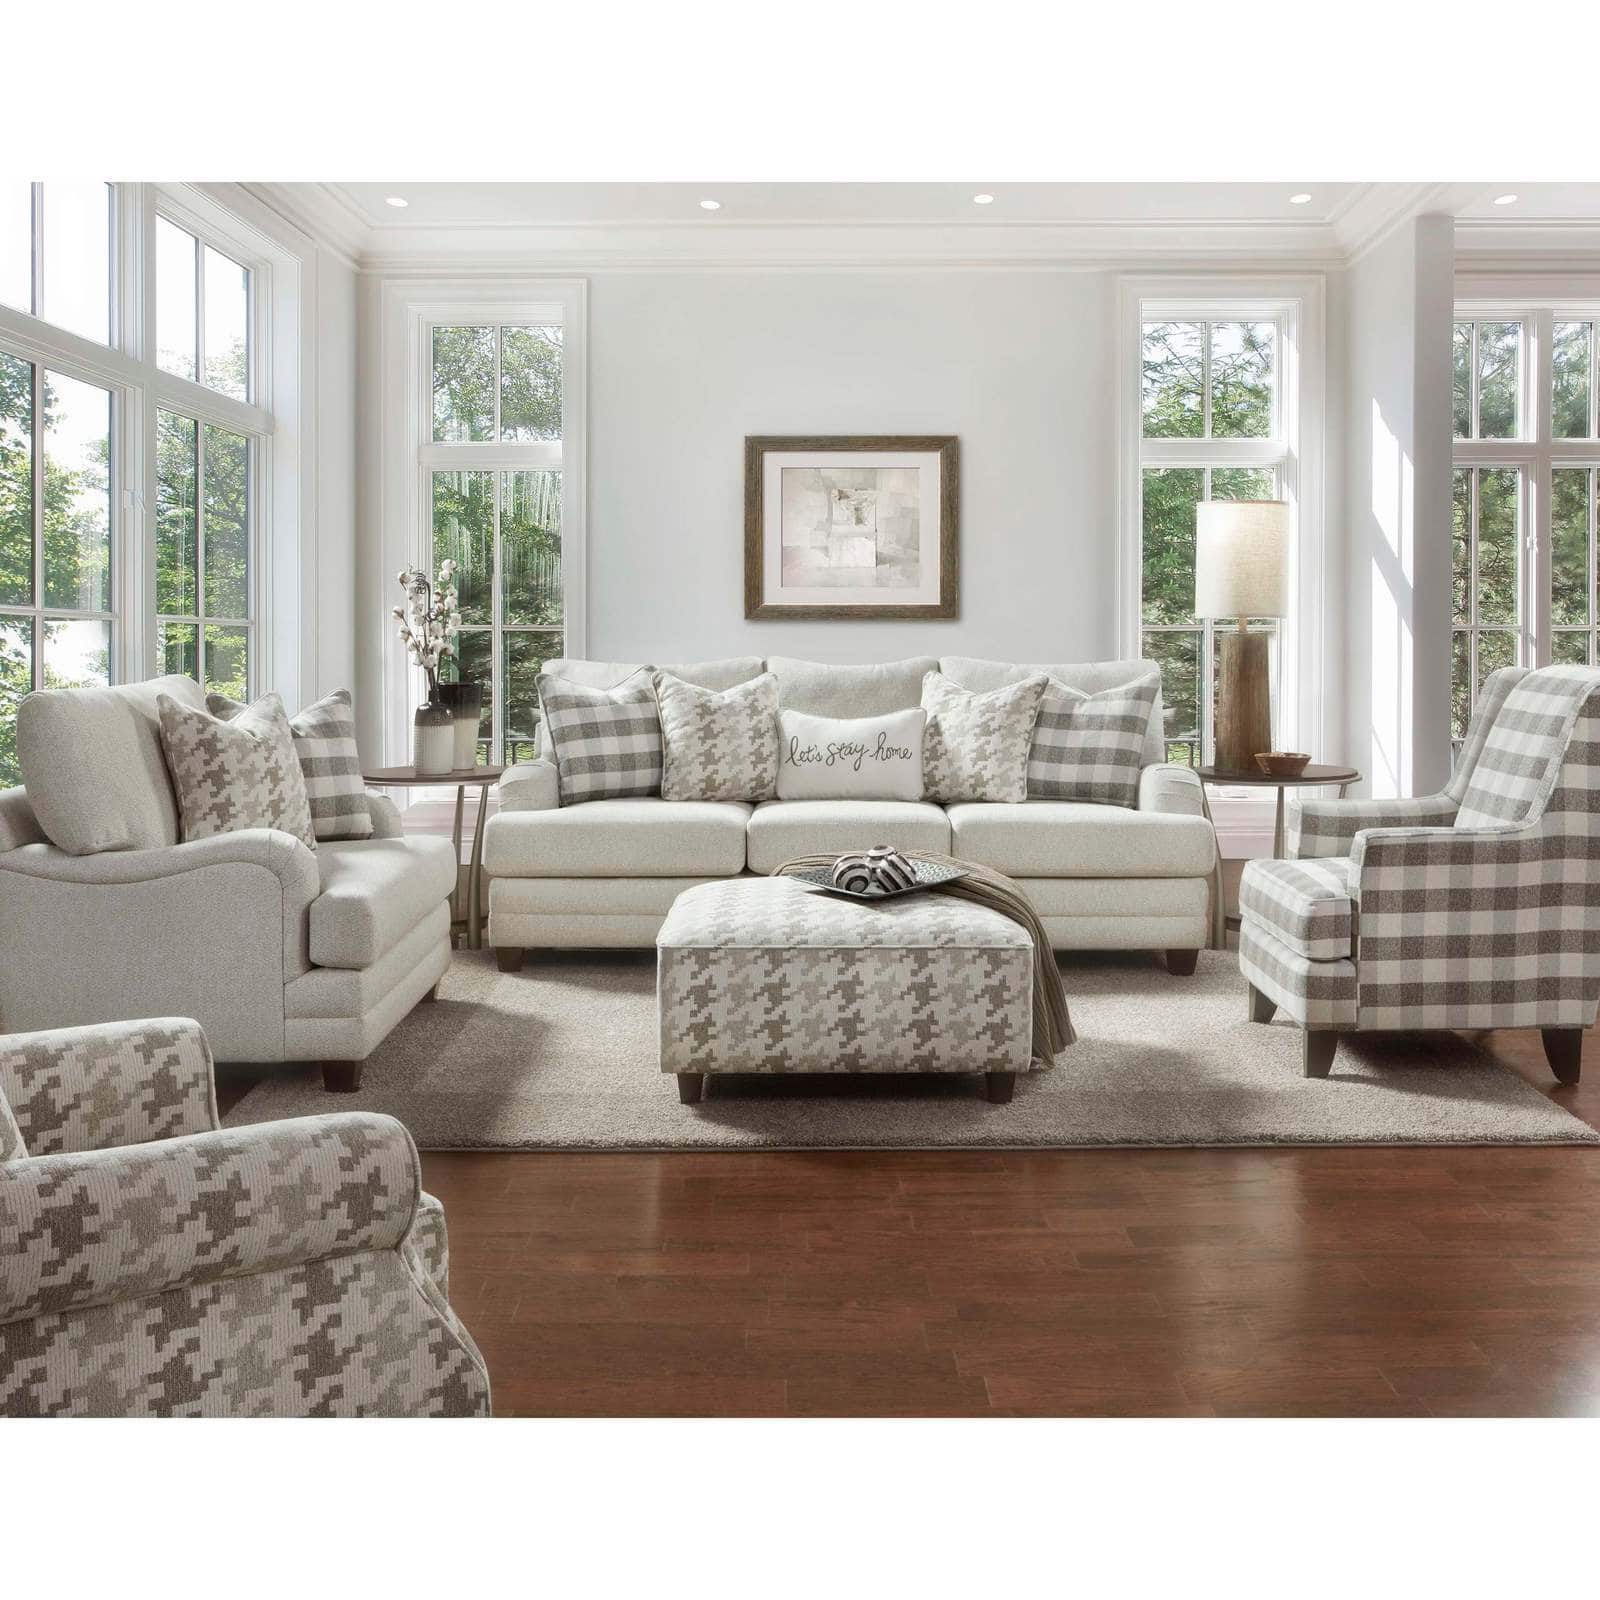 Get the Farmhouse Look with a Wool Sofa